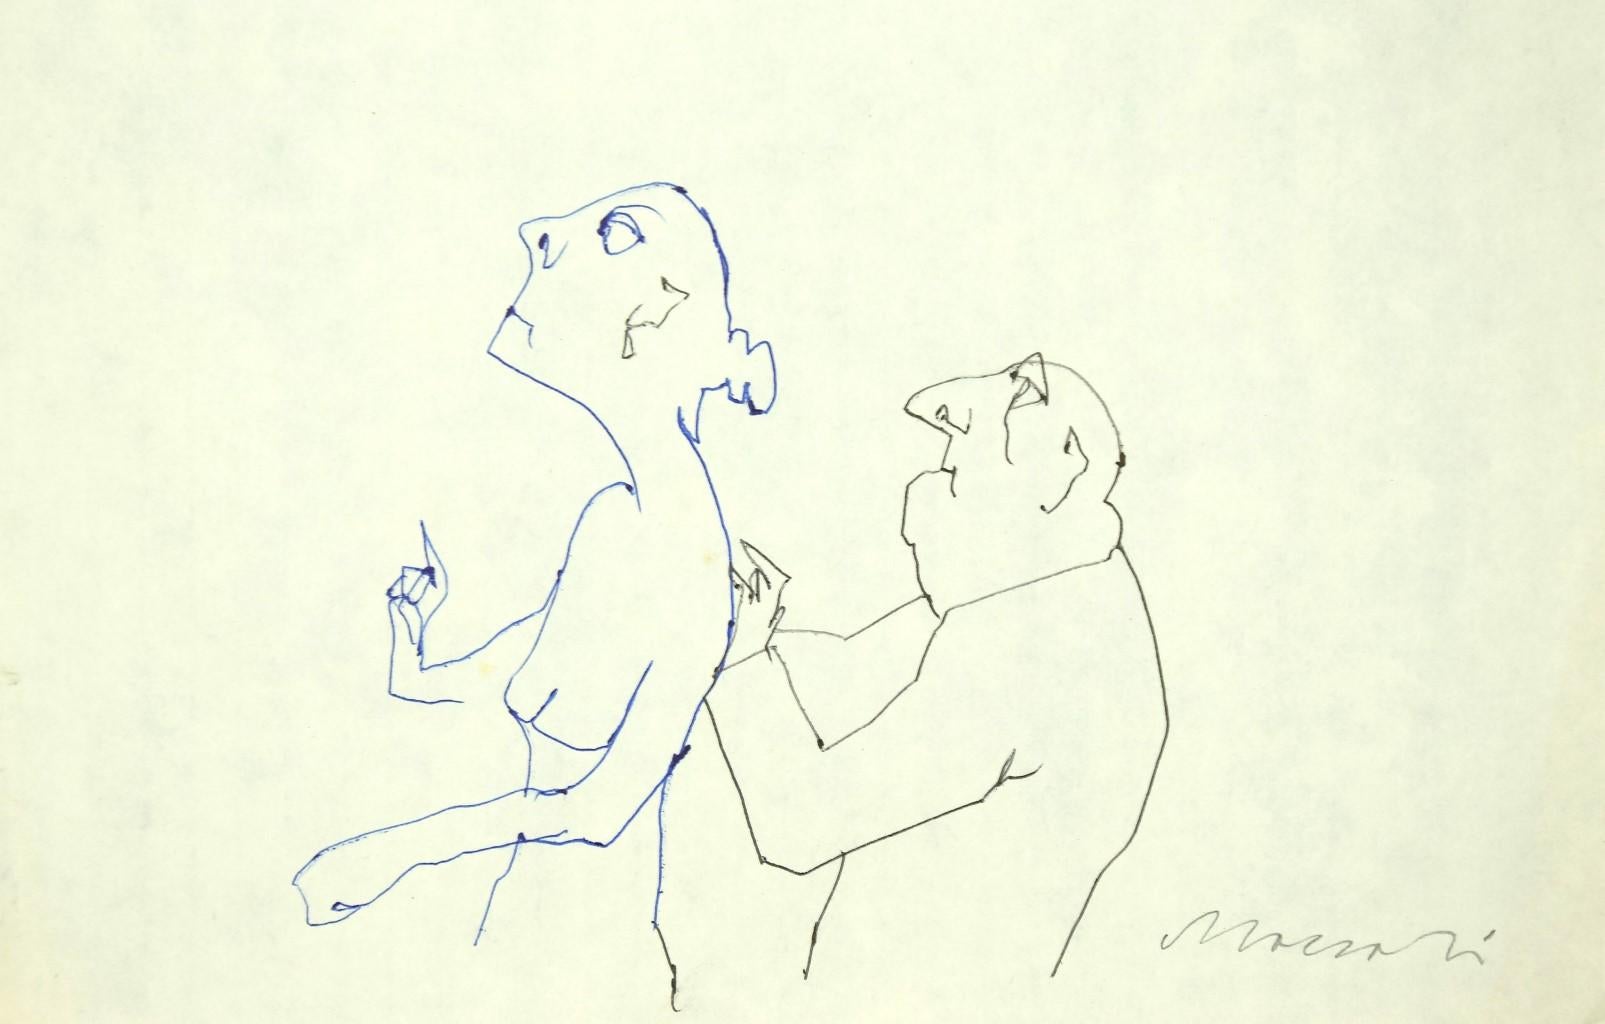 The Doctor is an original modern artwork realized the 1980s by the Italian artist Mino Maccari (Siena, 1898 - Rome, 1989).

Original pen drawing on Ivory paper. 

Hand-signed in pencil by the artist on the lower left corner: Maccari.

Excellent